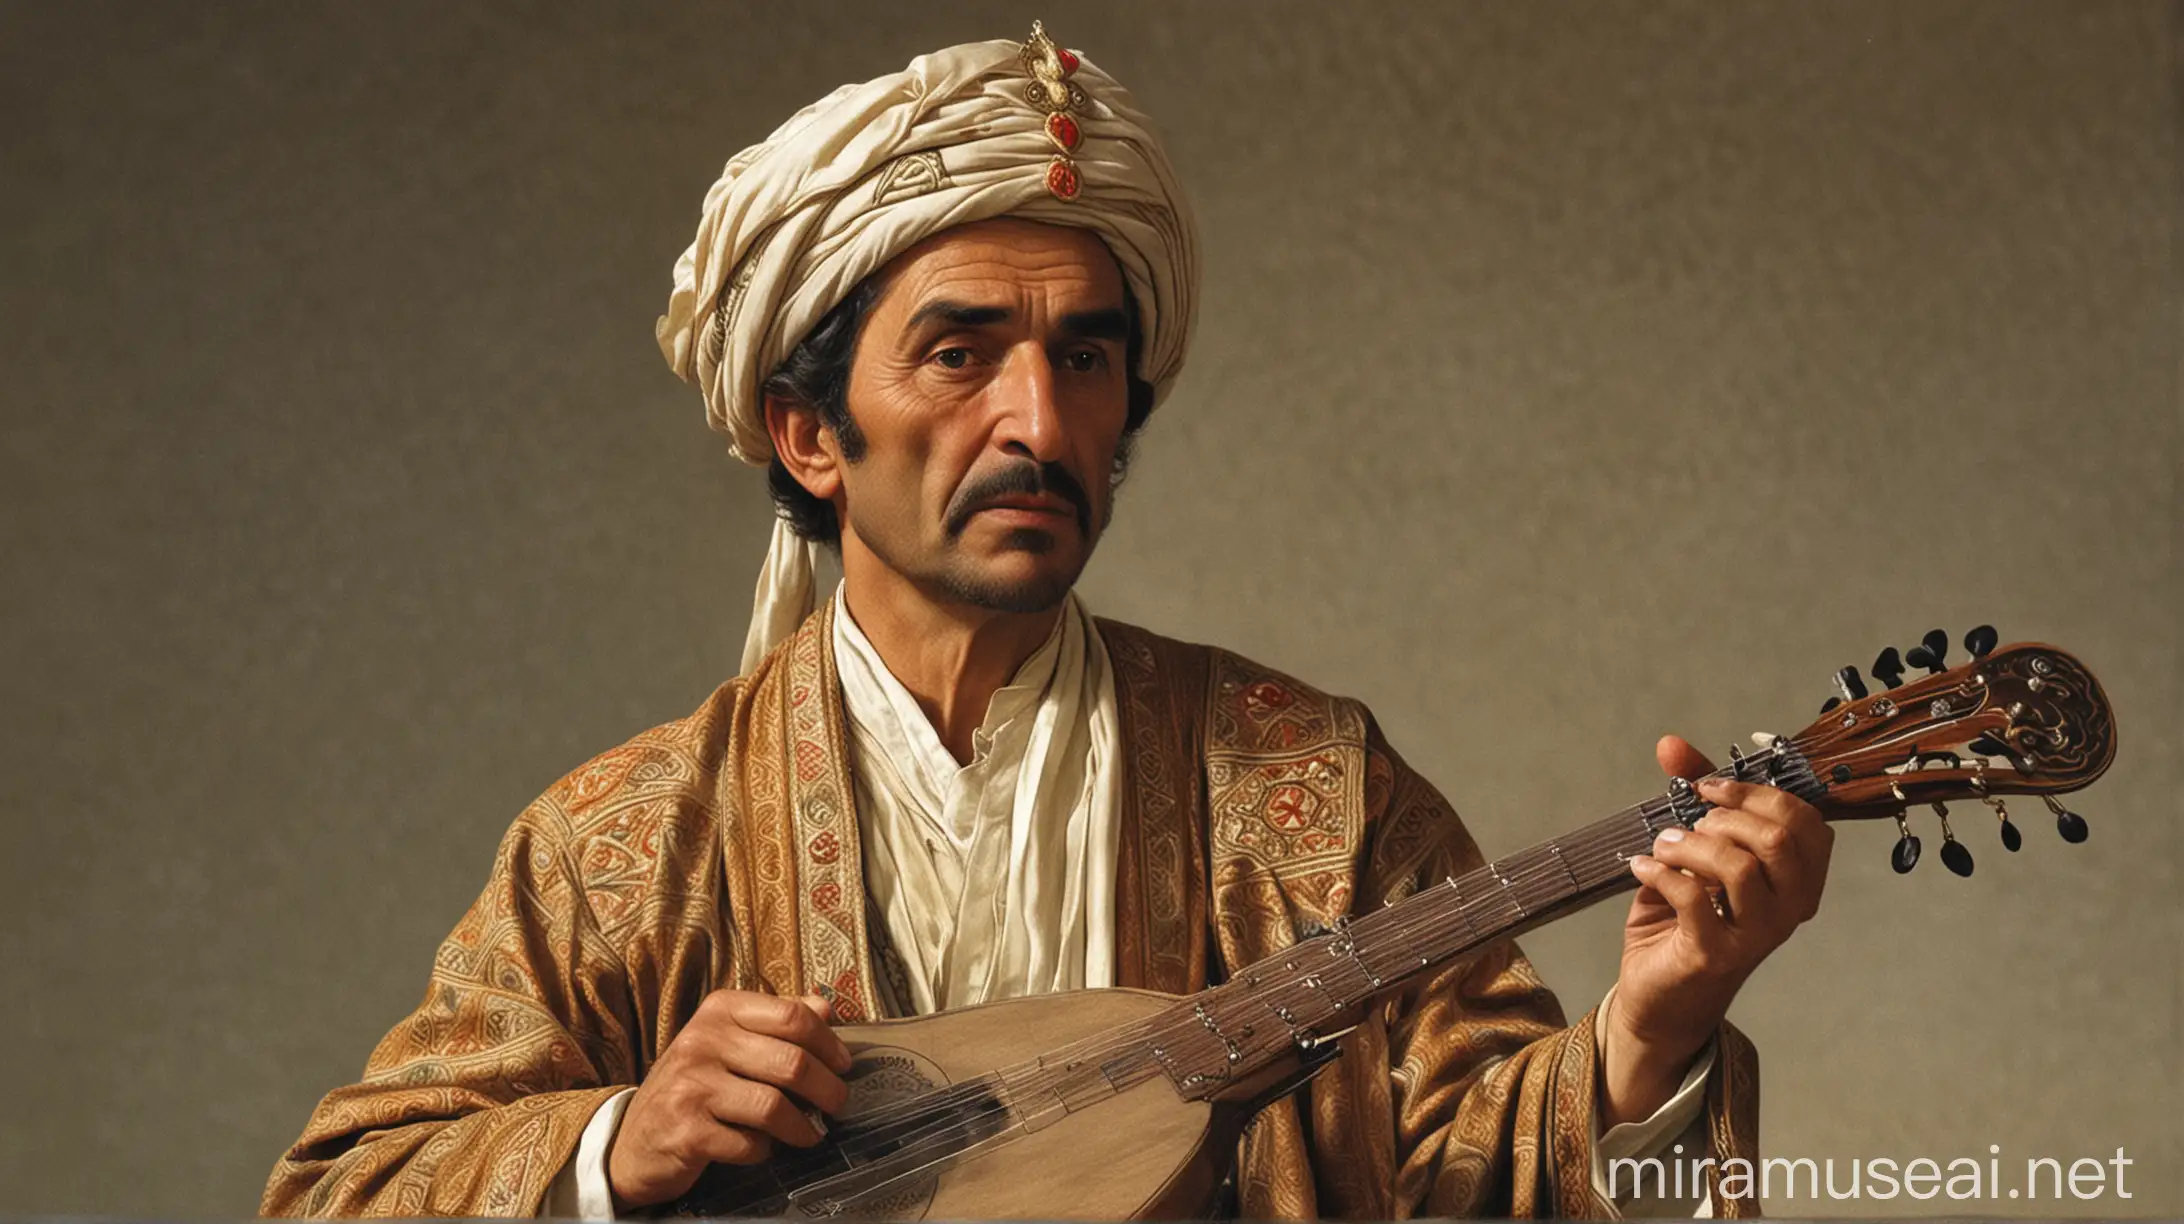 Karacaoğlan is a famous instrumental poet who appears in 17th century mecmuas. He is one of the leading figures of minstrel literature. Although there is no definite information about his life, it is known that he was born in Çukurova-Toroslar region and lived among Turkmen tribes.